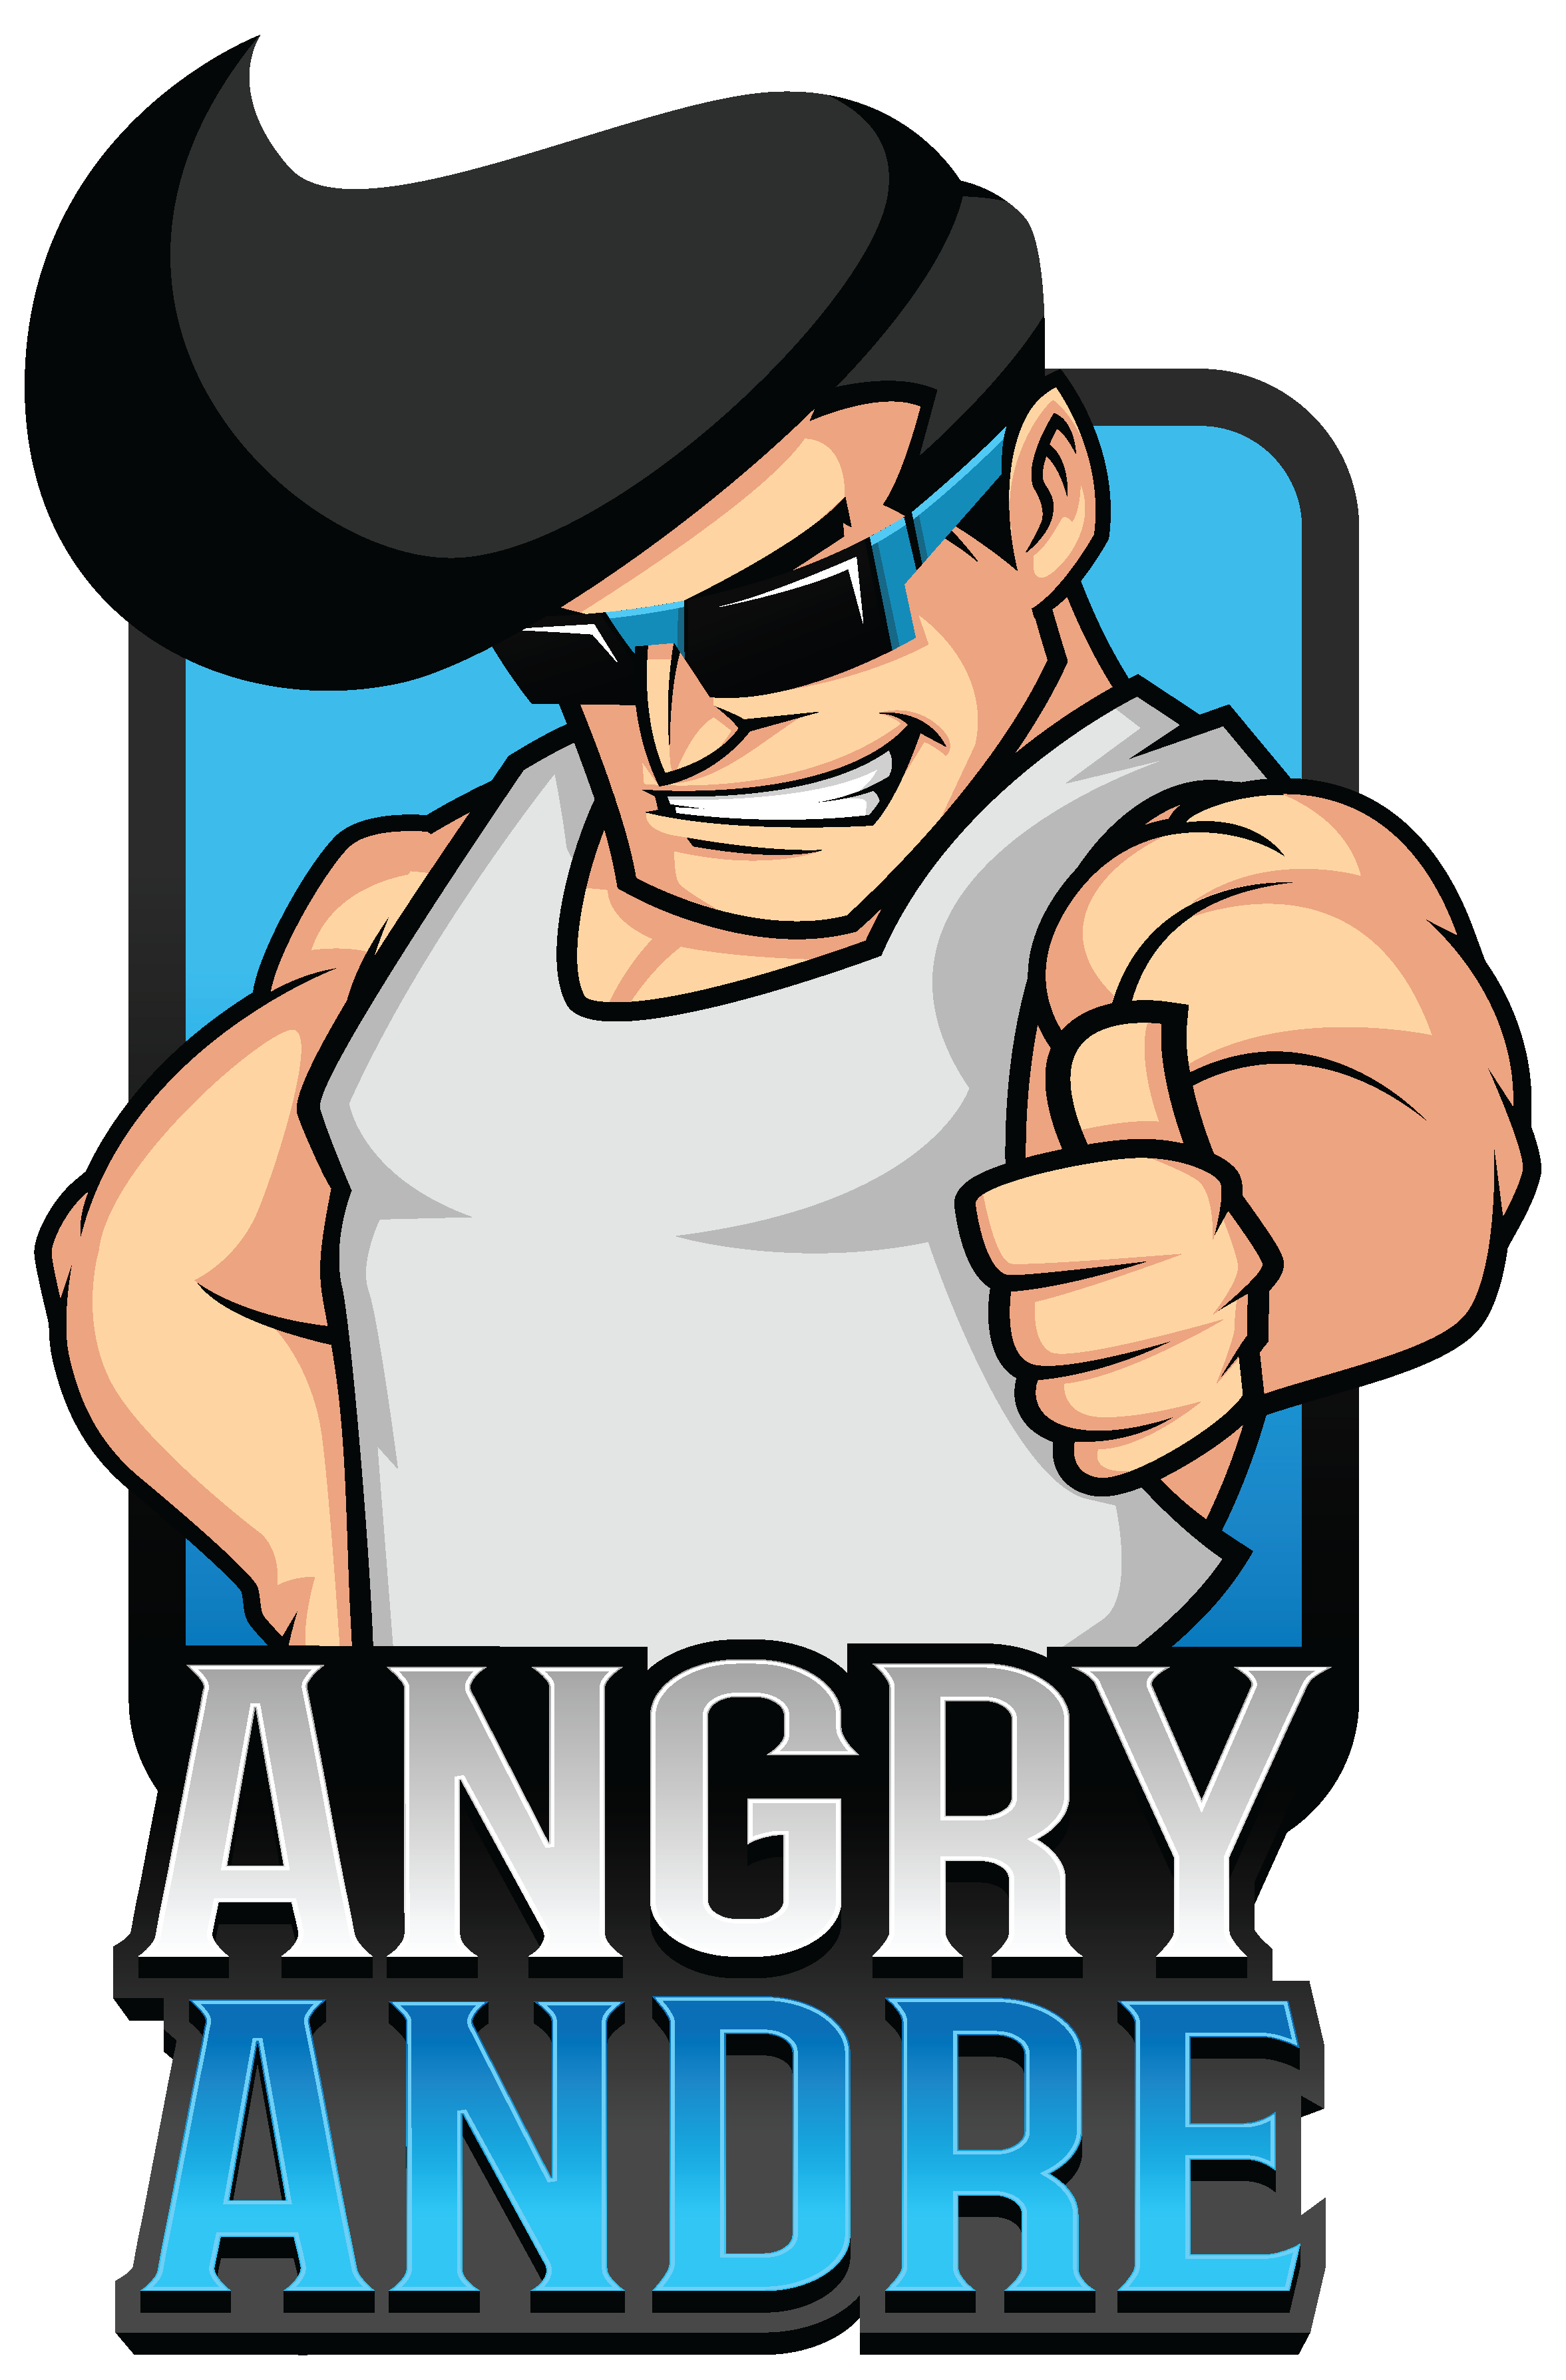 Librarian clipart angry. Andre mobile application developer